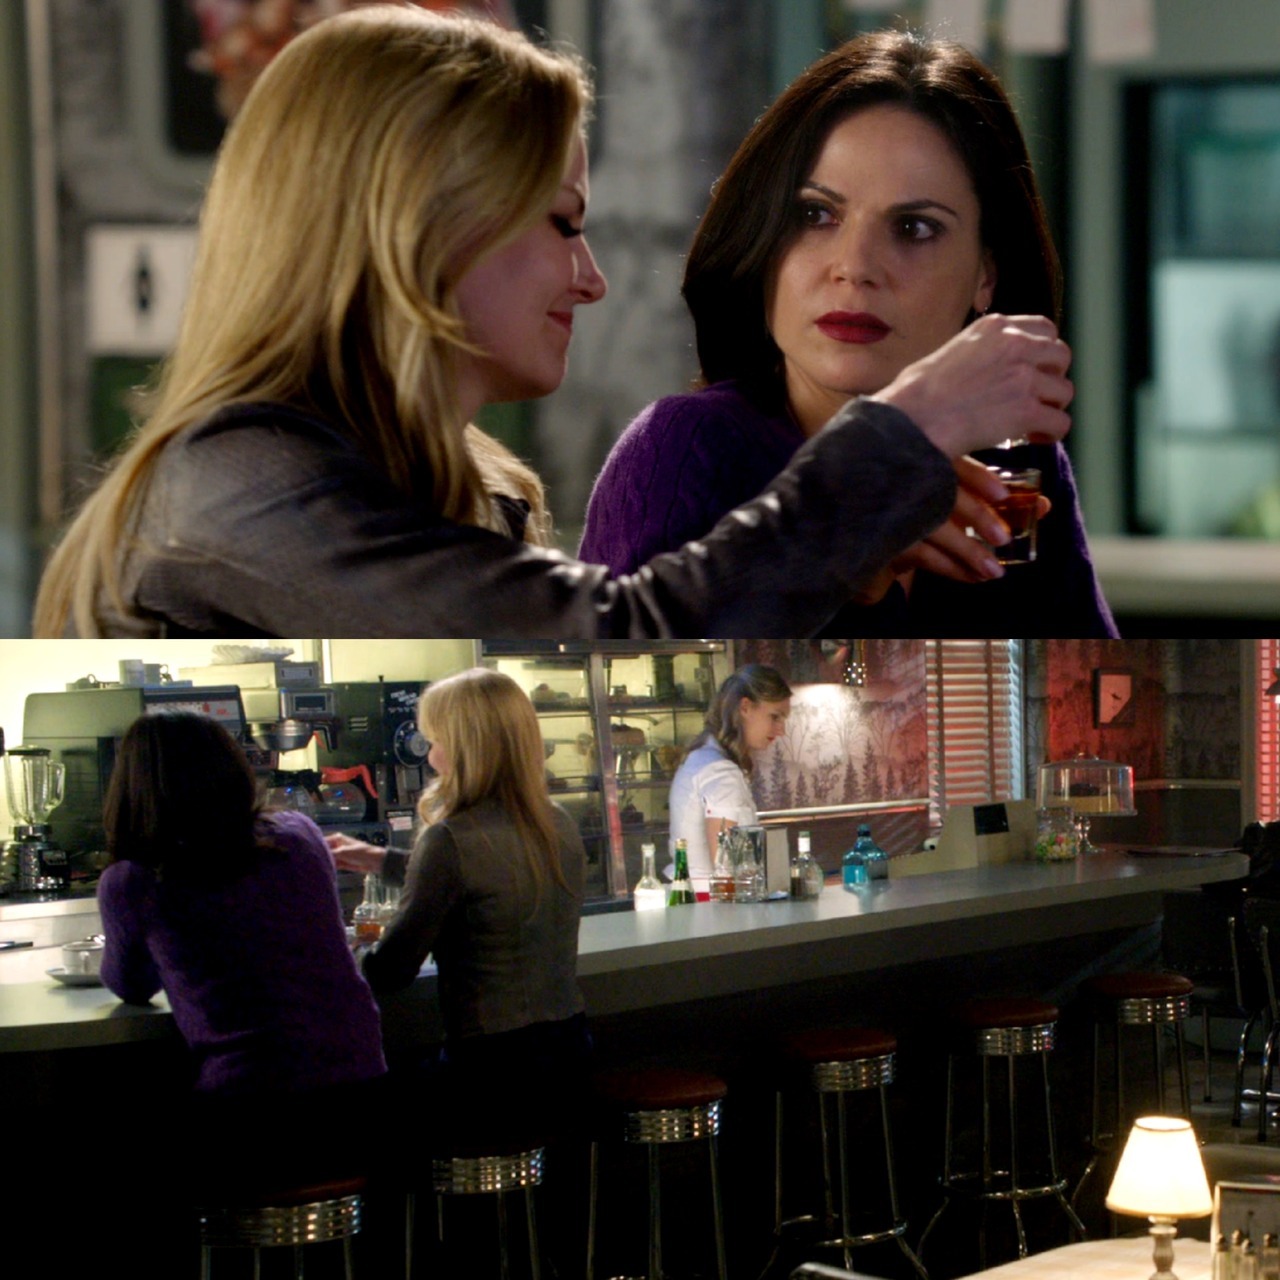 lana-lana-b0-bana:   That time Emma and Regina had drinks together in a dim, romantically-lit